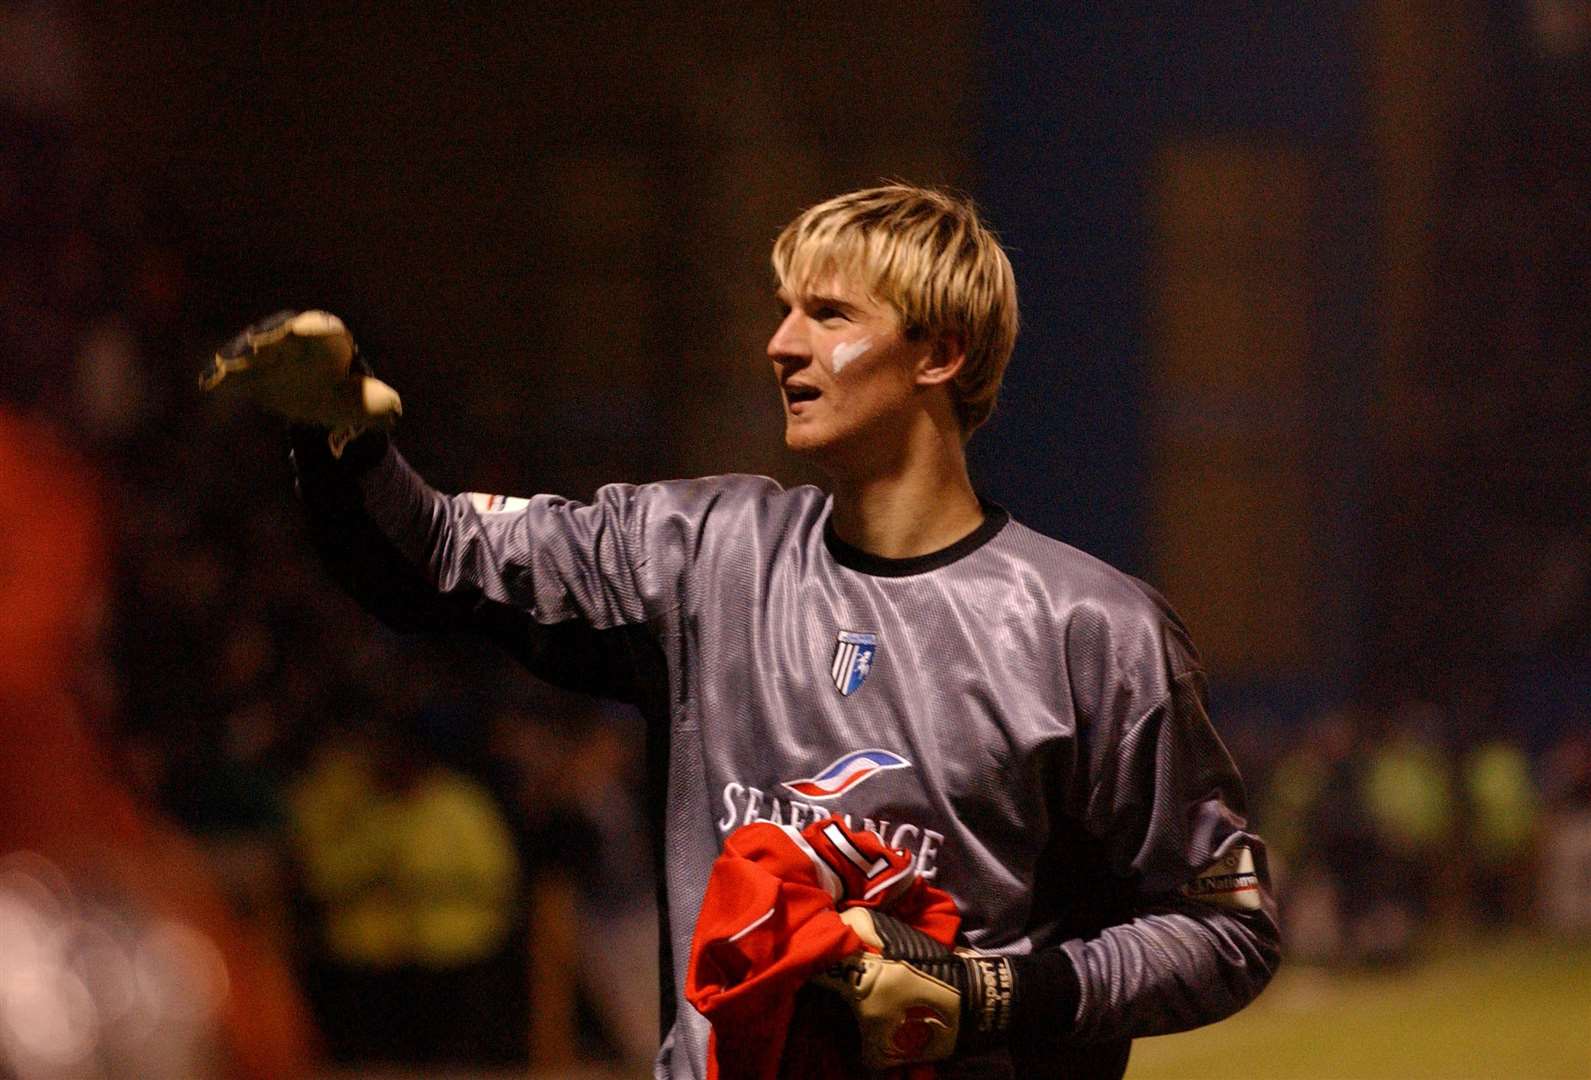 Gillingham's goalkeeper Bertrand Bossu celebrates at the end of the game against Charlton Athletic